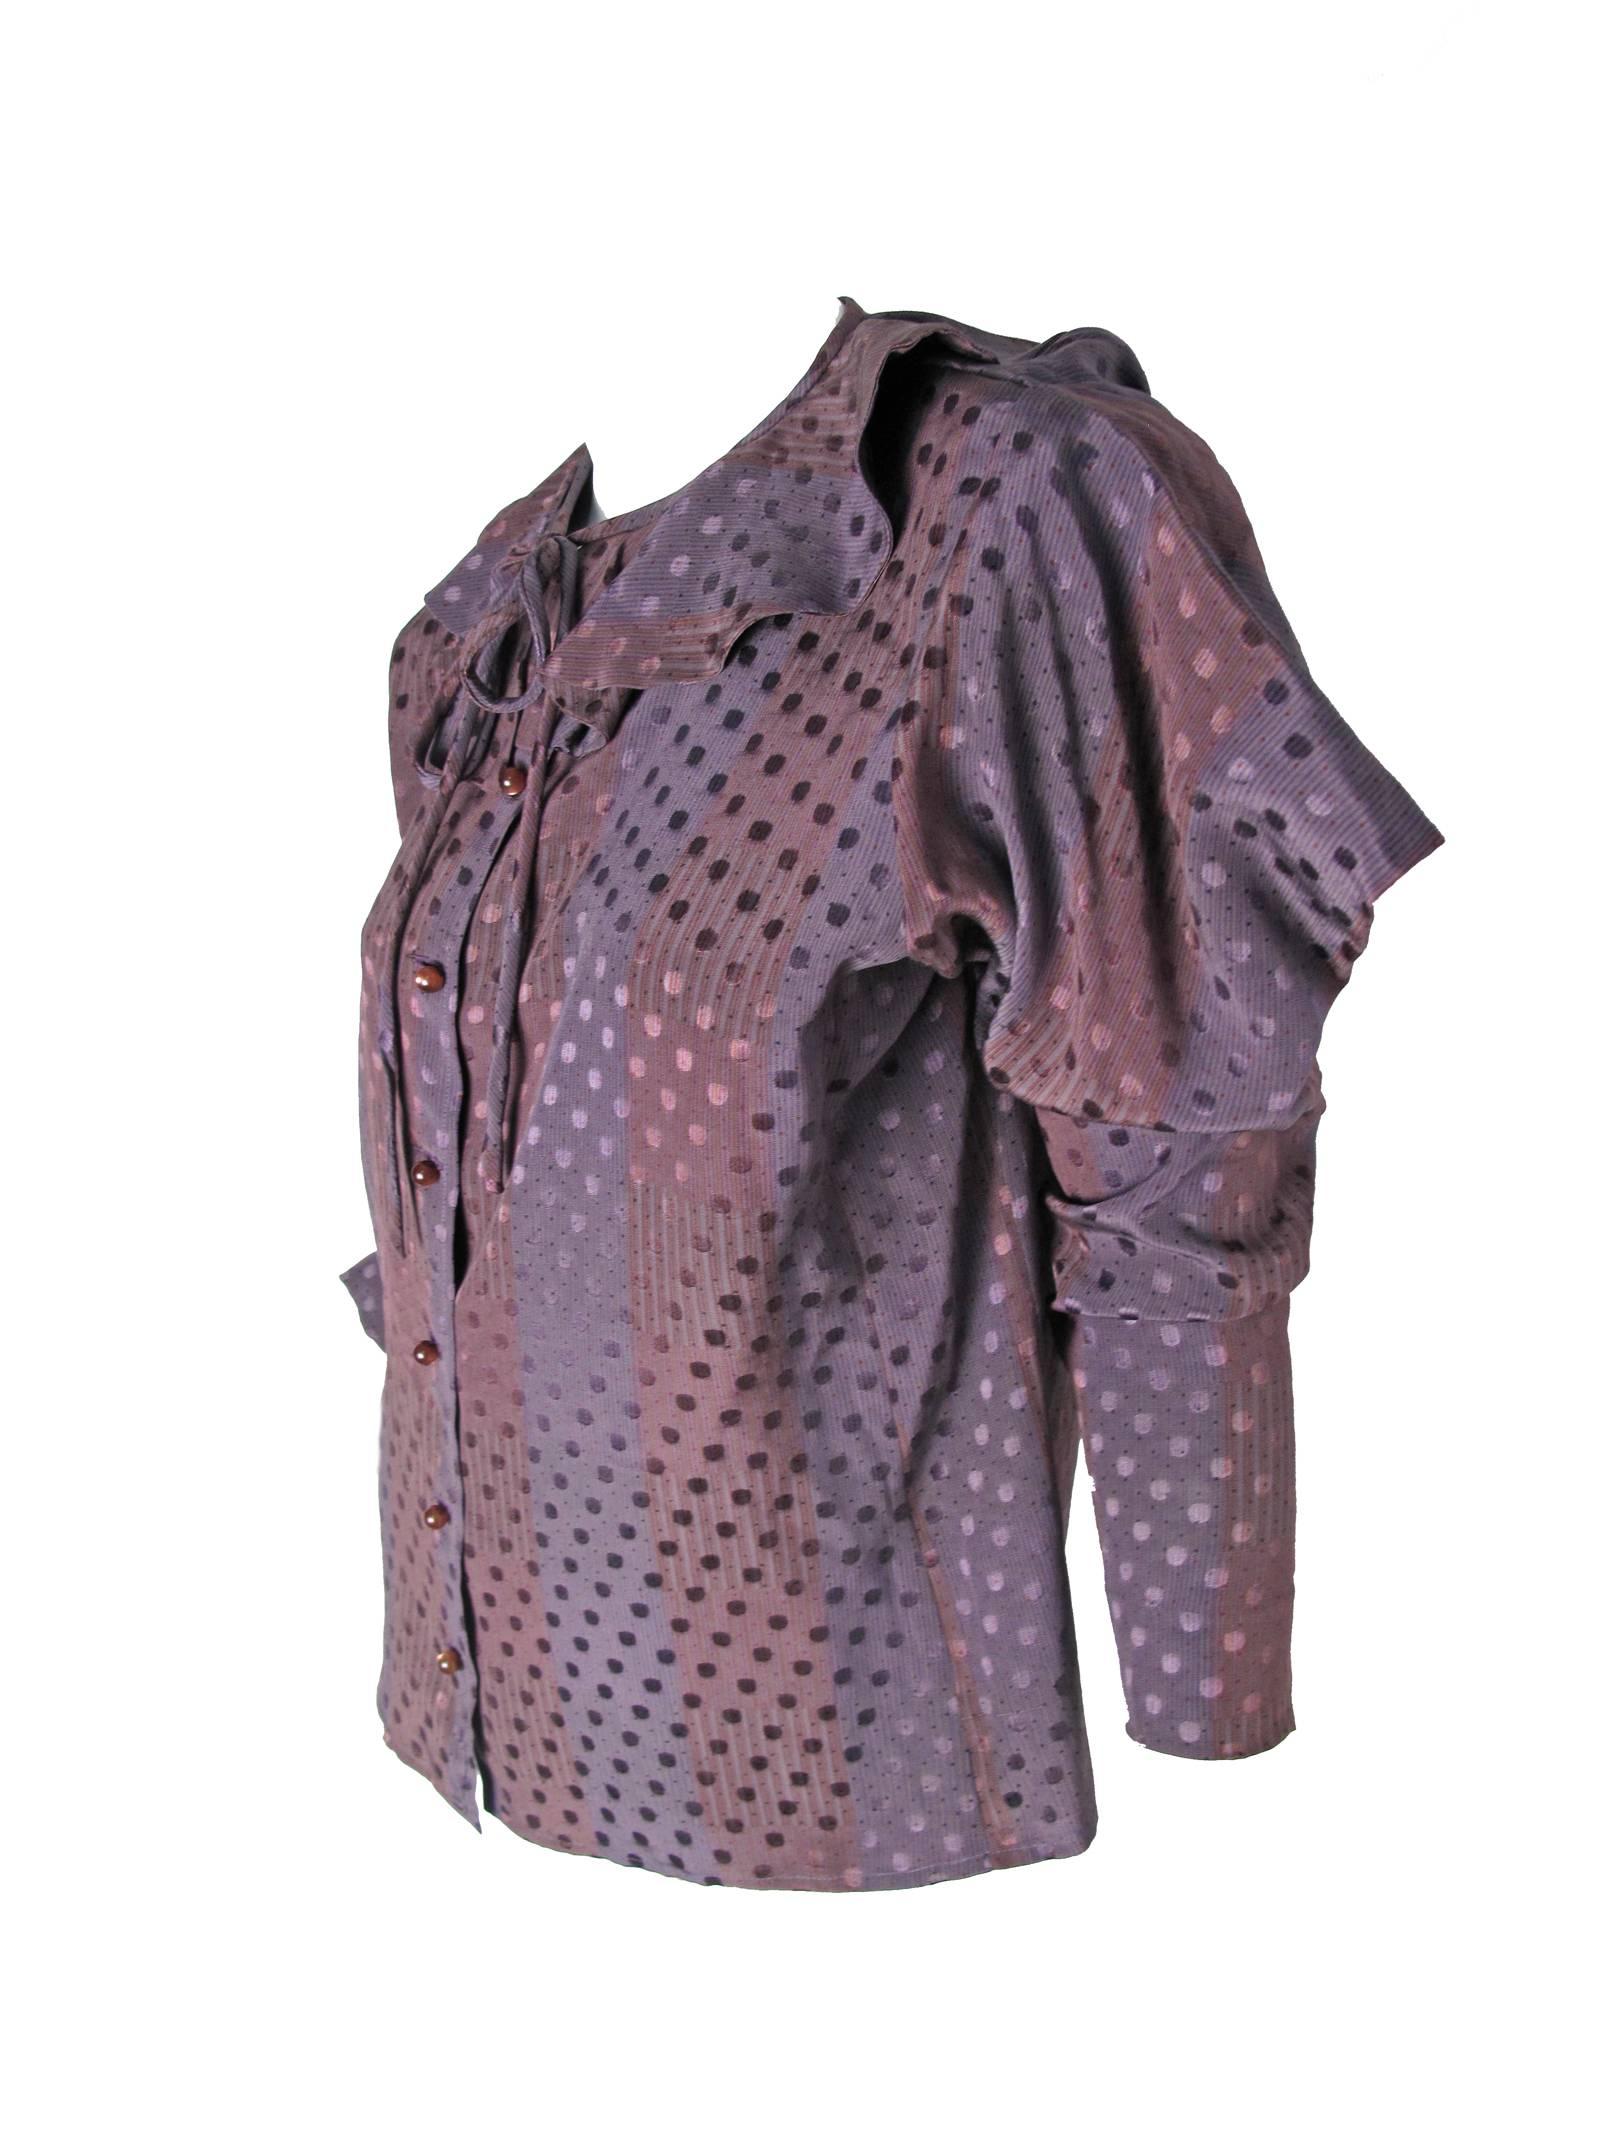 1970s Ungaro purple silk blouse with stripe and polka dot print, ruffle at collar and tie.  Buttons down front, interesting sleeves. 
Condition: Excellent. Size 14 / or current US Large
41